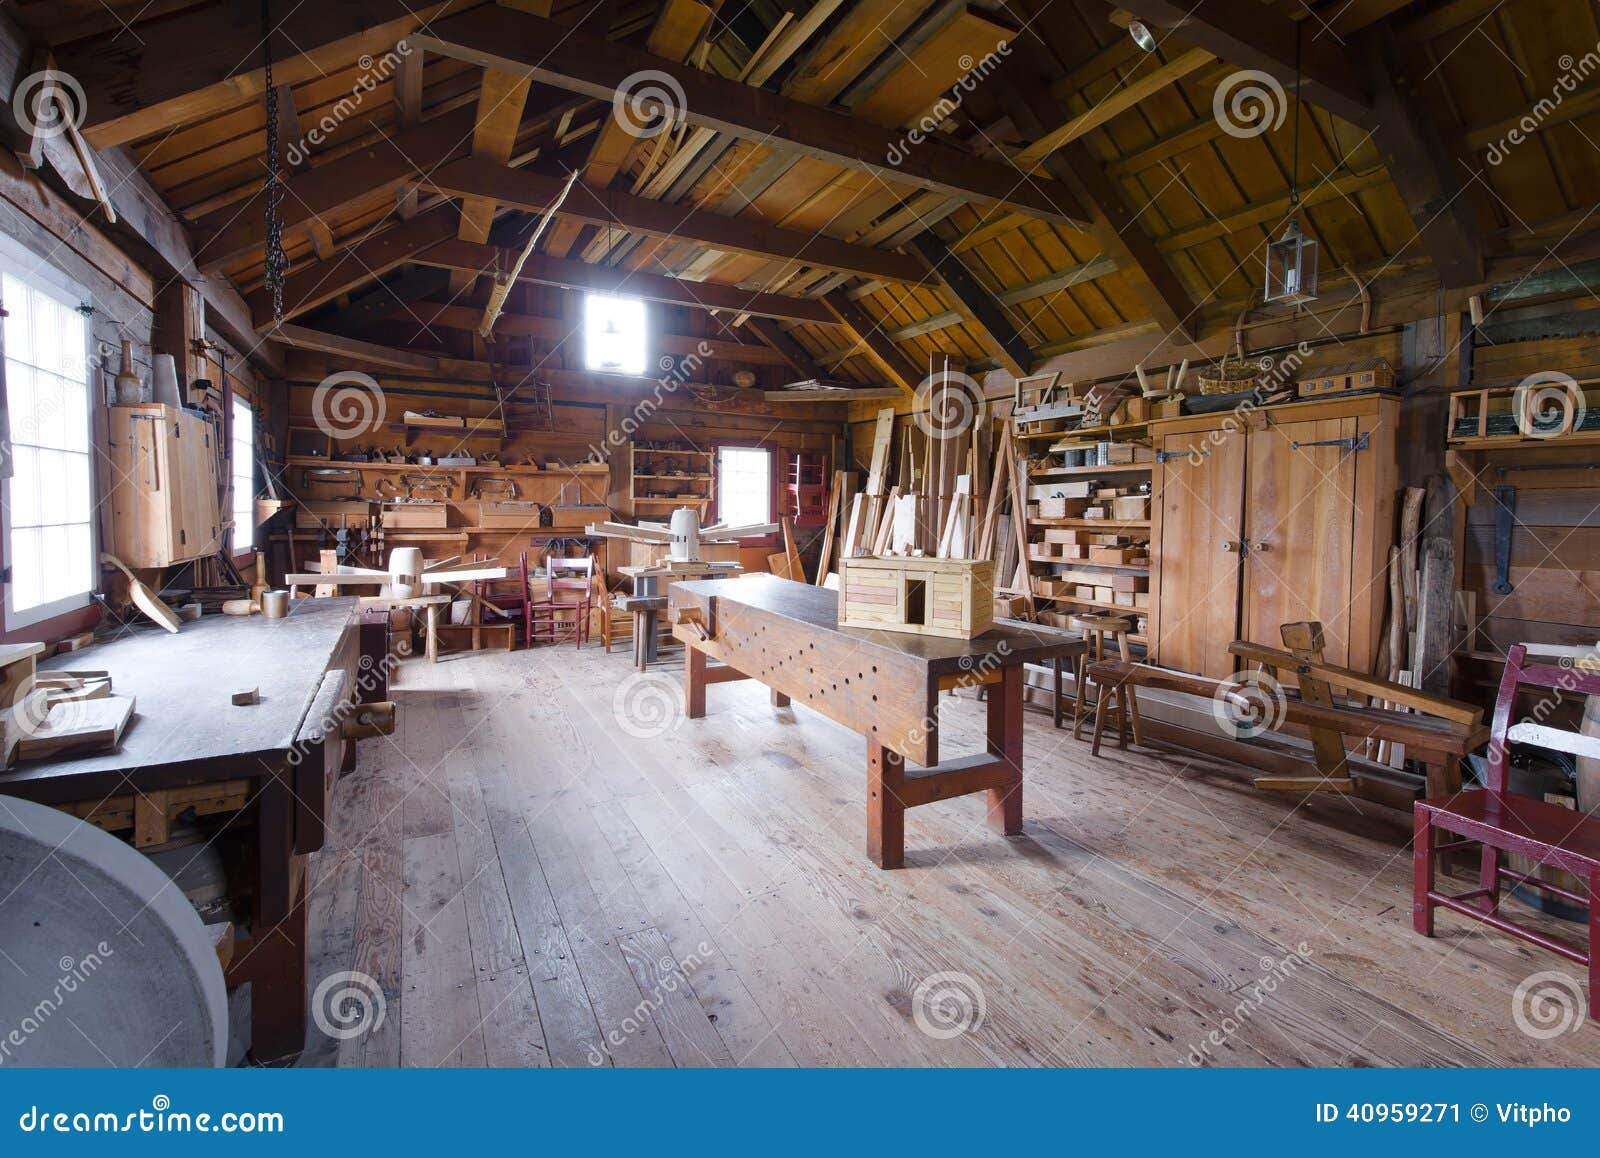 Carpentry With Tools And Wood Workpieces Stock Image 